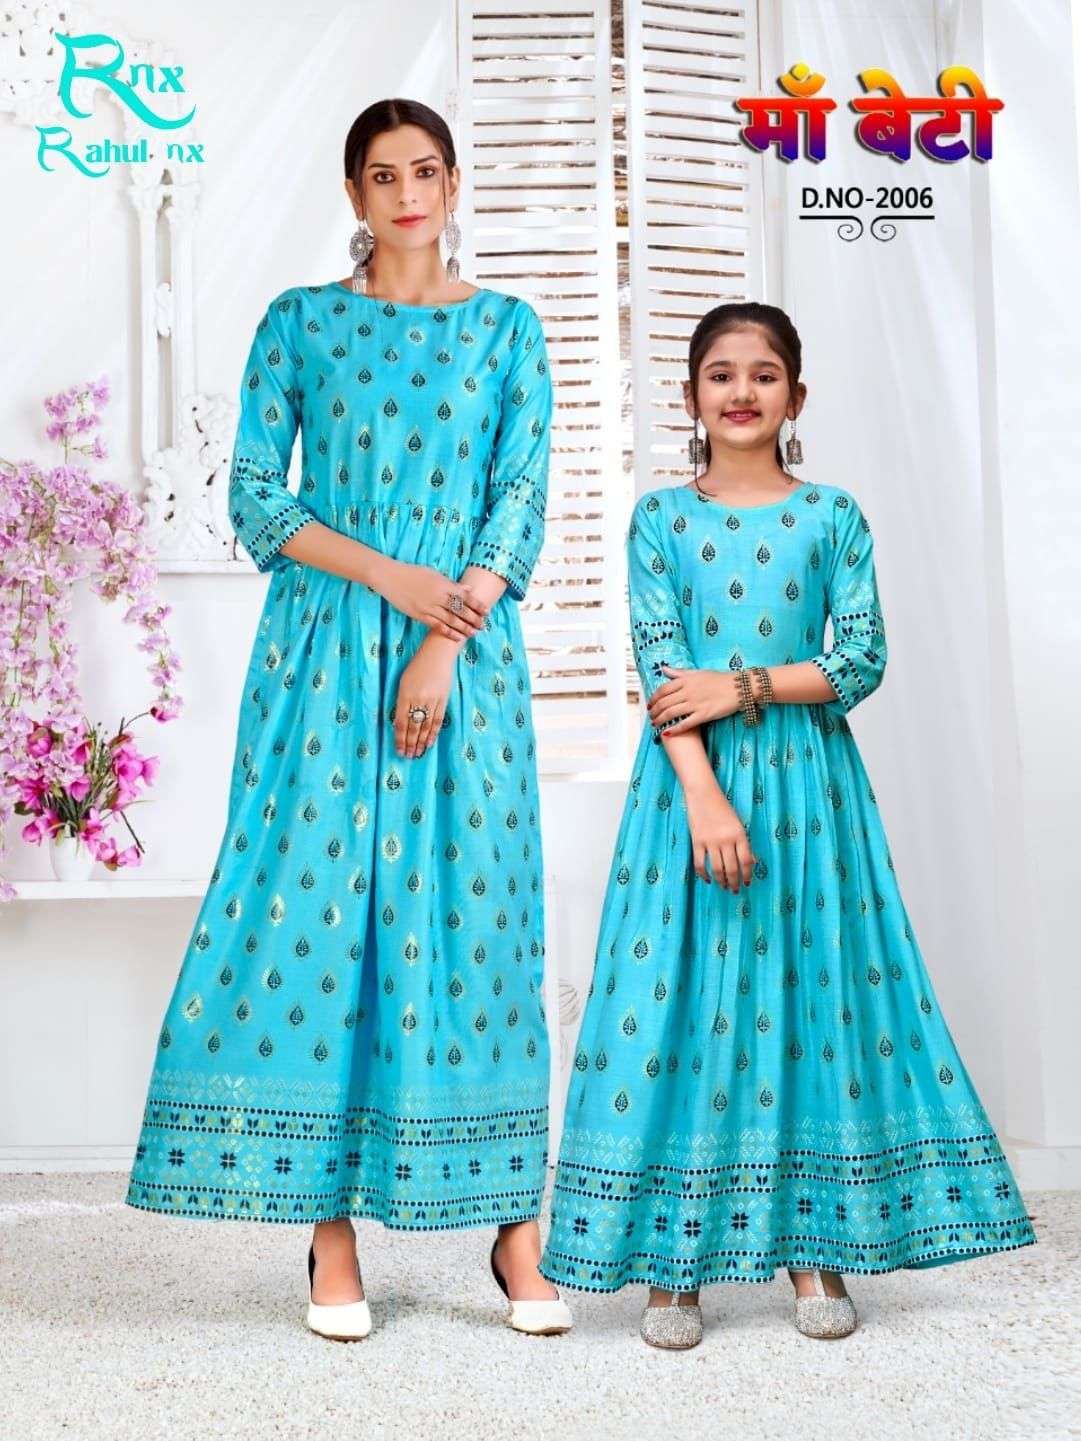 MAA BETI VOL-2 BY RAHUL NX 2001 TO 2008 SERIES BEAUTIFUL STYLISH FANCY COLORFUL CASUAL WEAR & ETHNIC WEAR RAYON FOIL GOWNS AT WHOLESALE PRICE